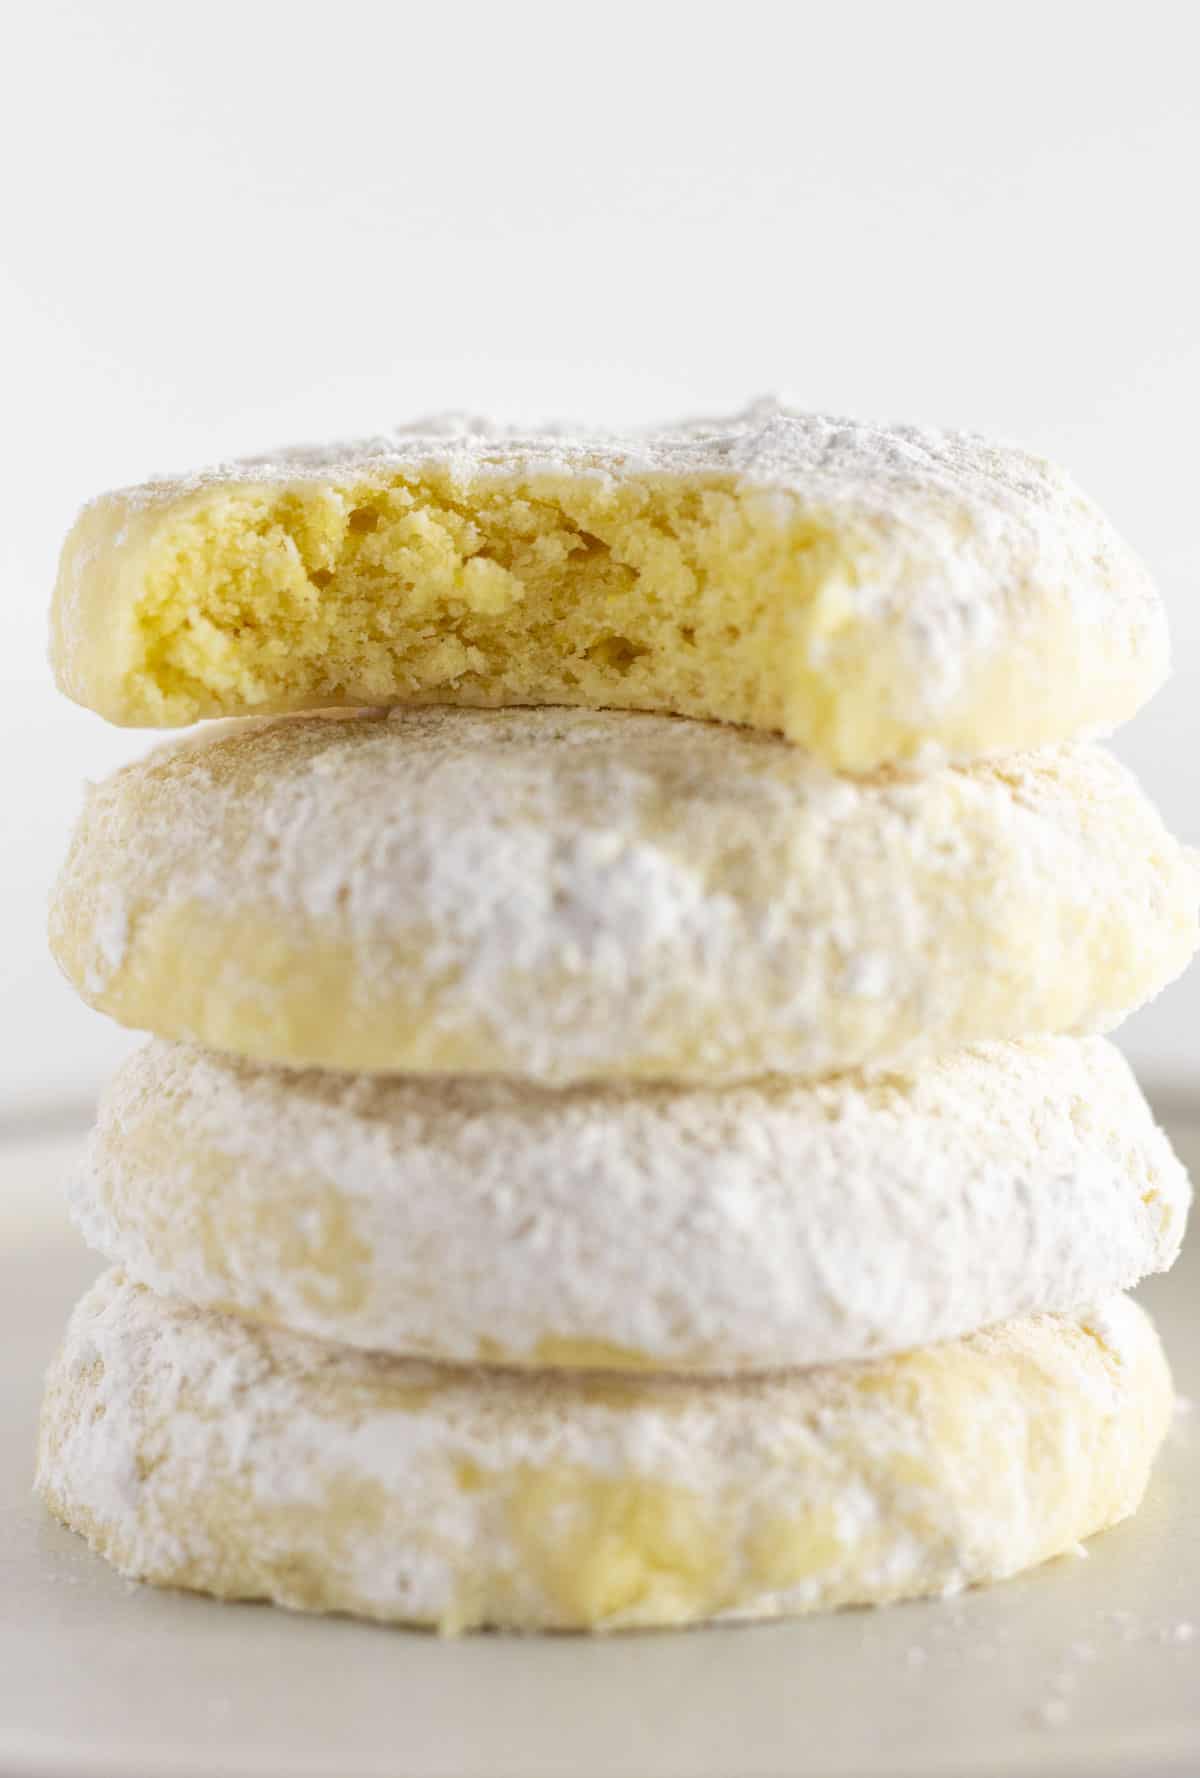 Four lemon cooler cookies stacked on top of each other with the top one having a bite taken out.